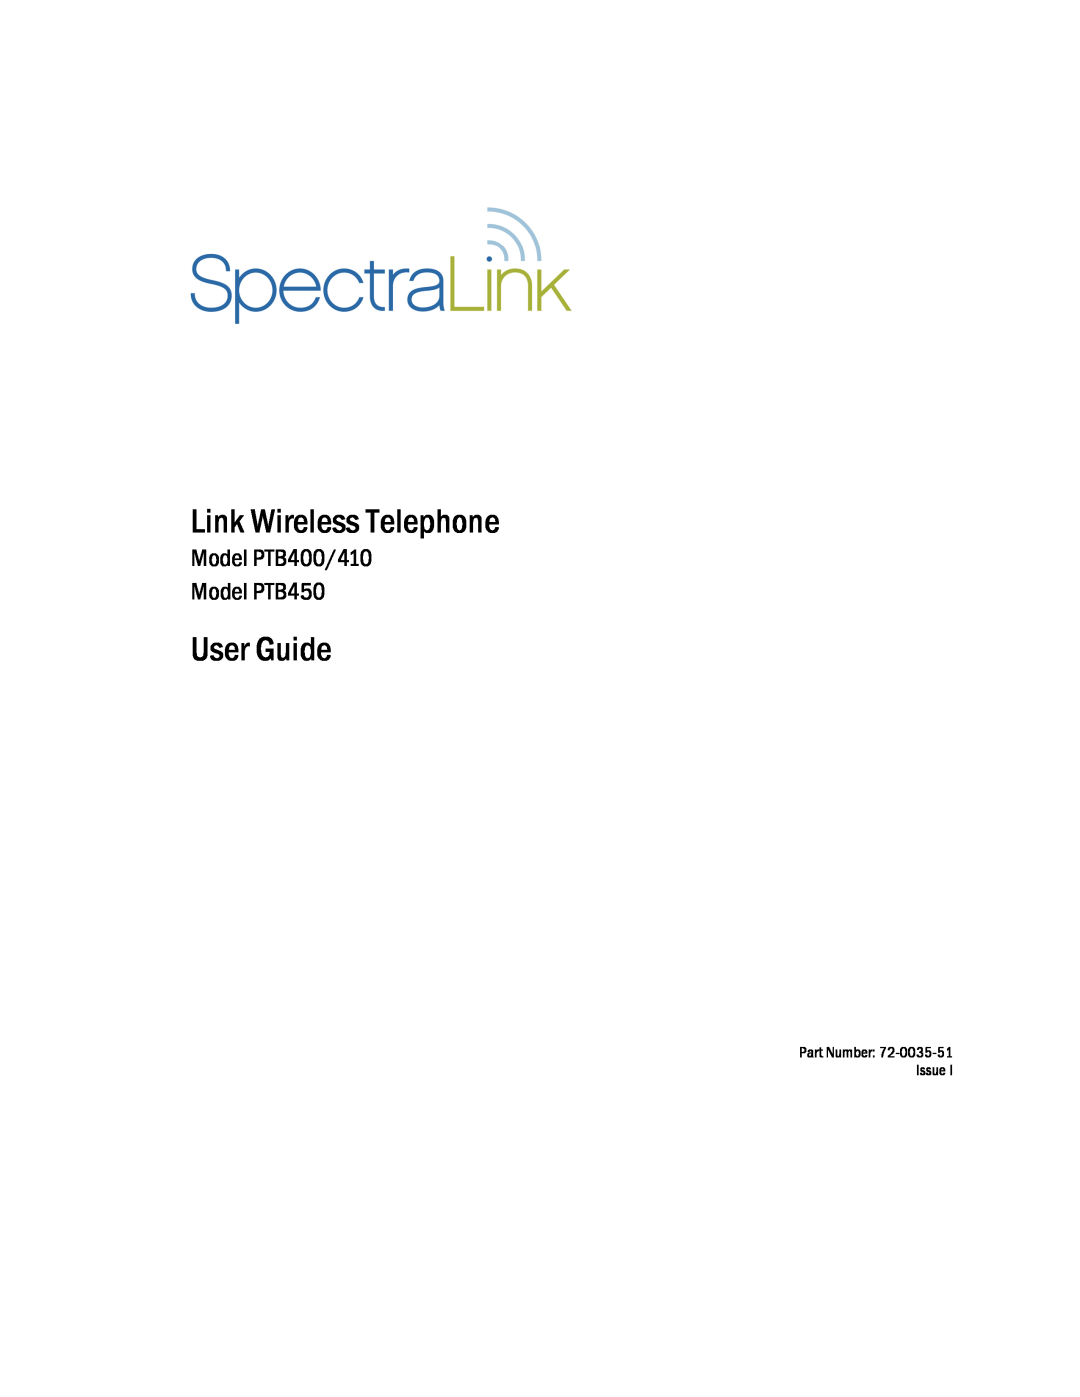 SpectraLink PTB410 service manual Instructions For Use, Battery Packs, Setting User Preferences, Status/Tone Indicators 